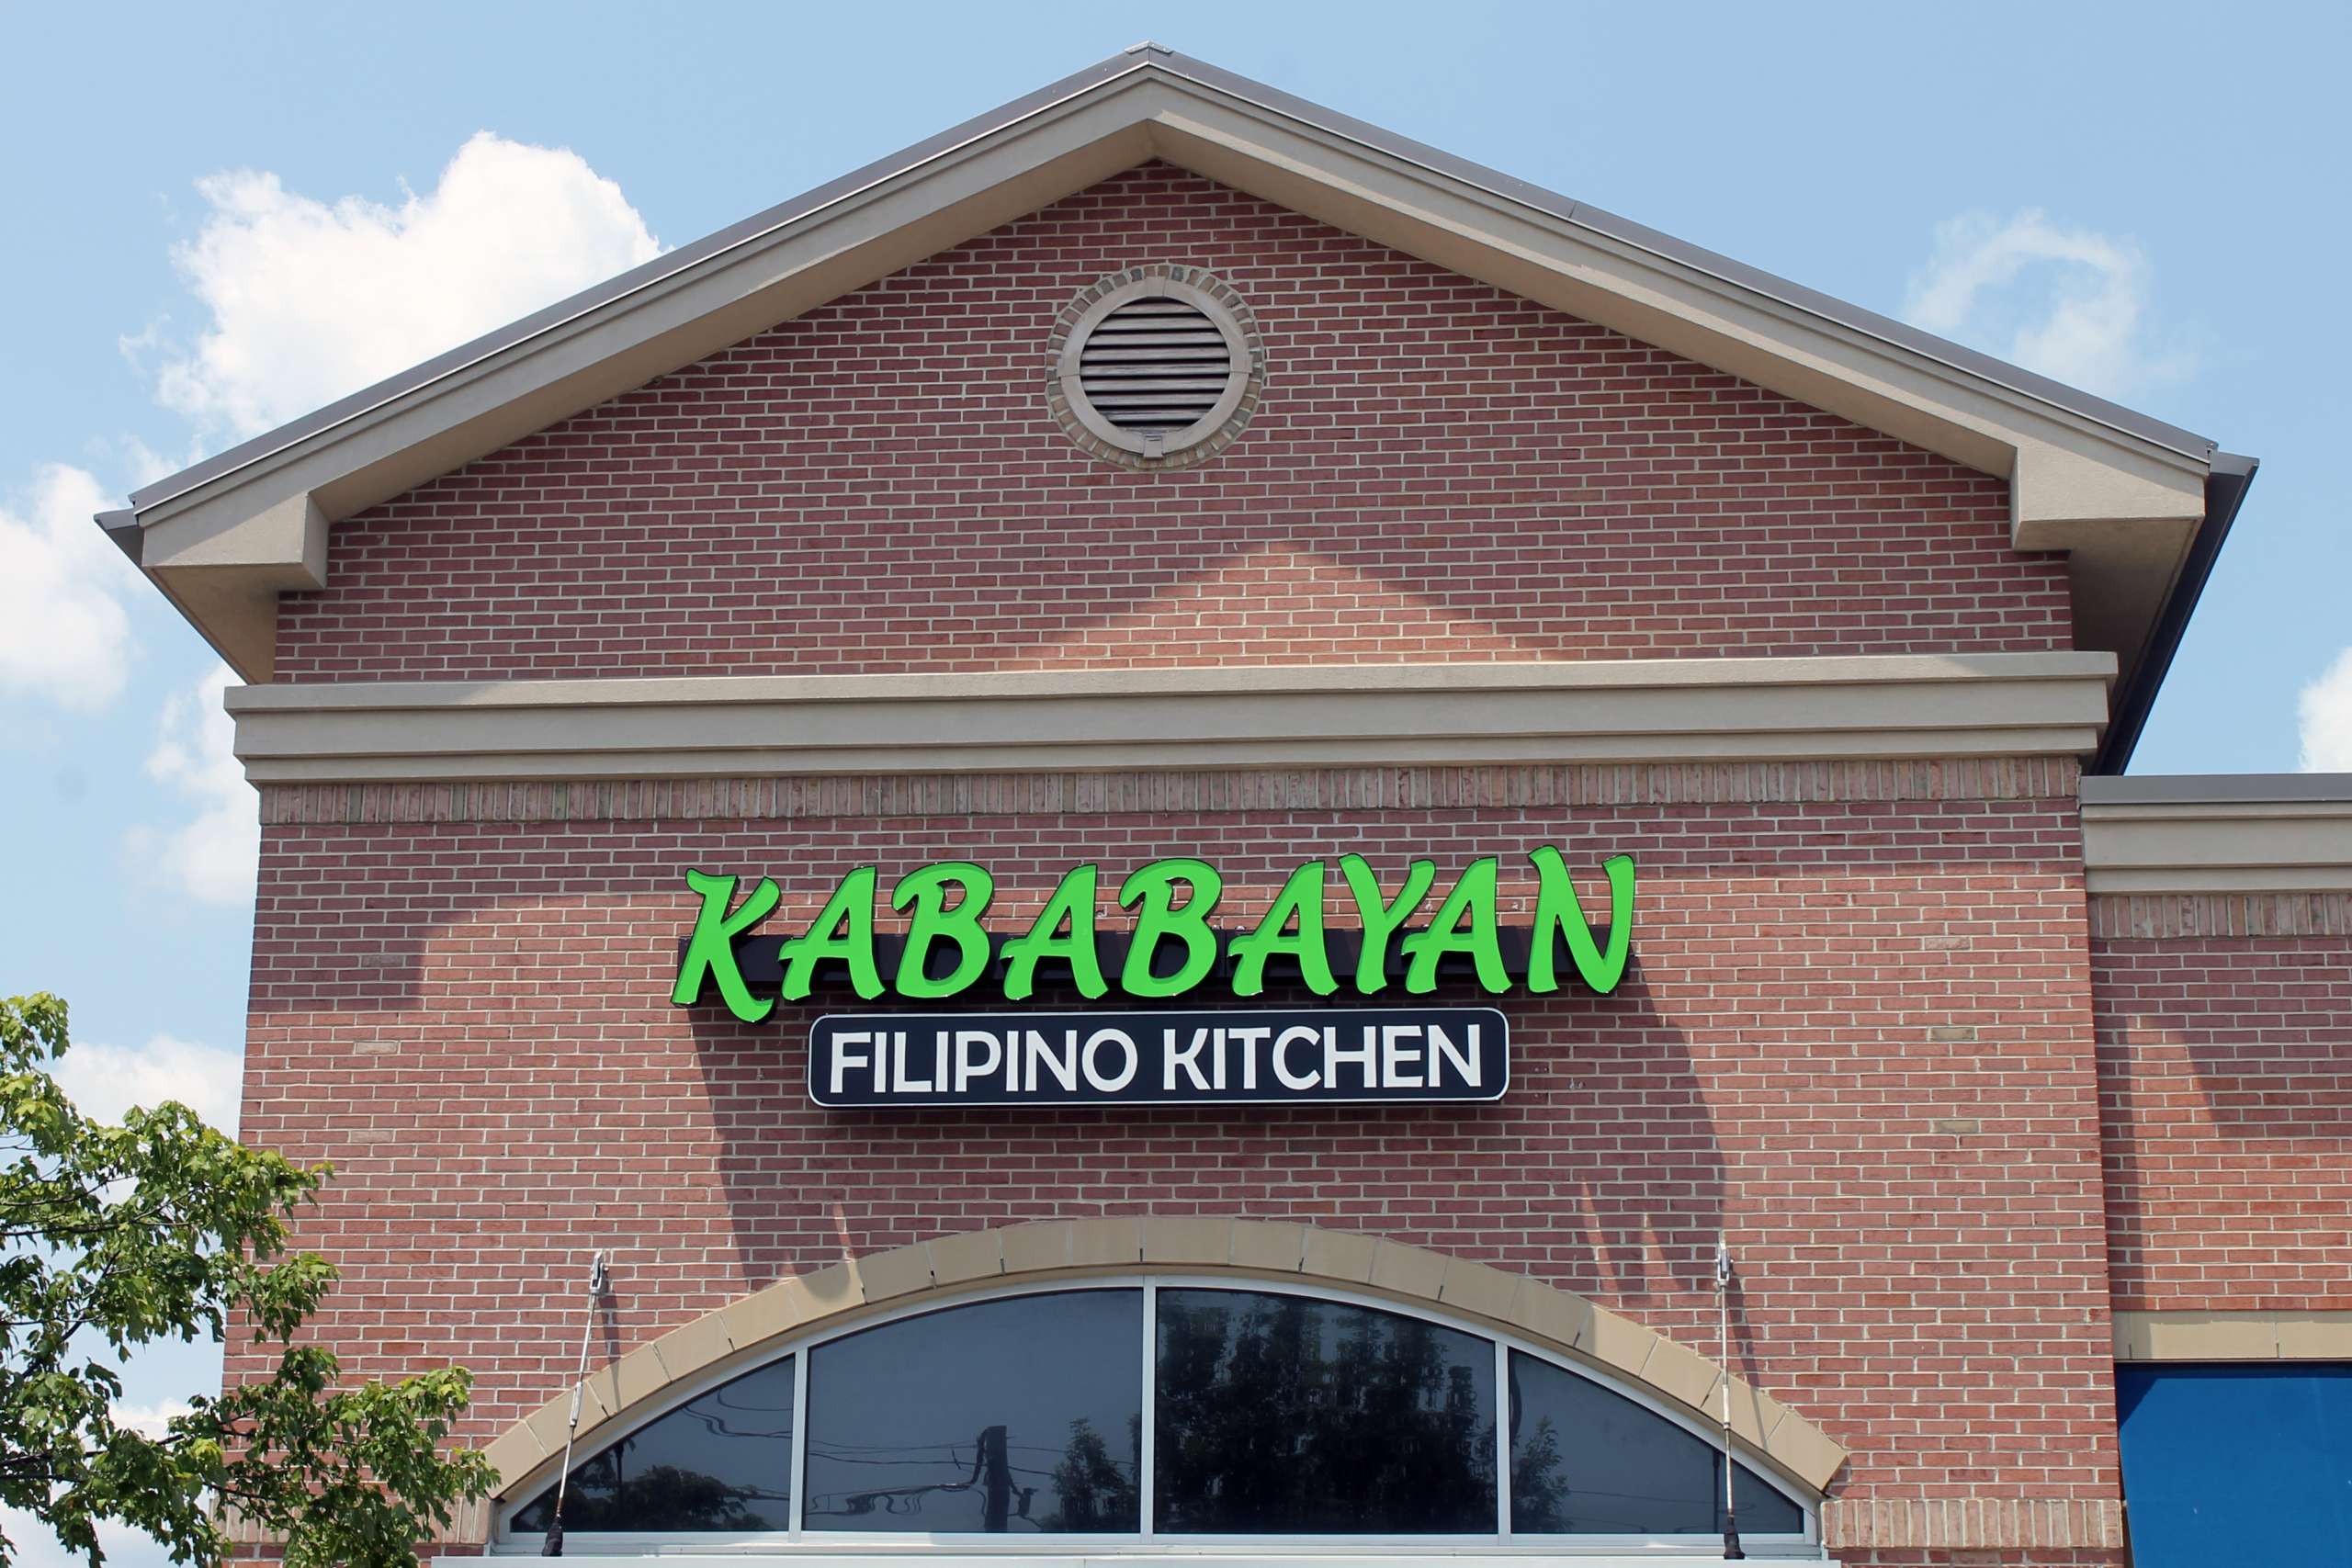 After 17 years, Kababayan: Filipino Kitchen Relocates to a New and Improved Storefront